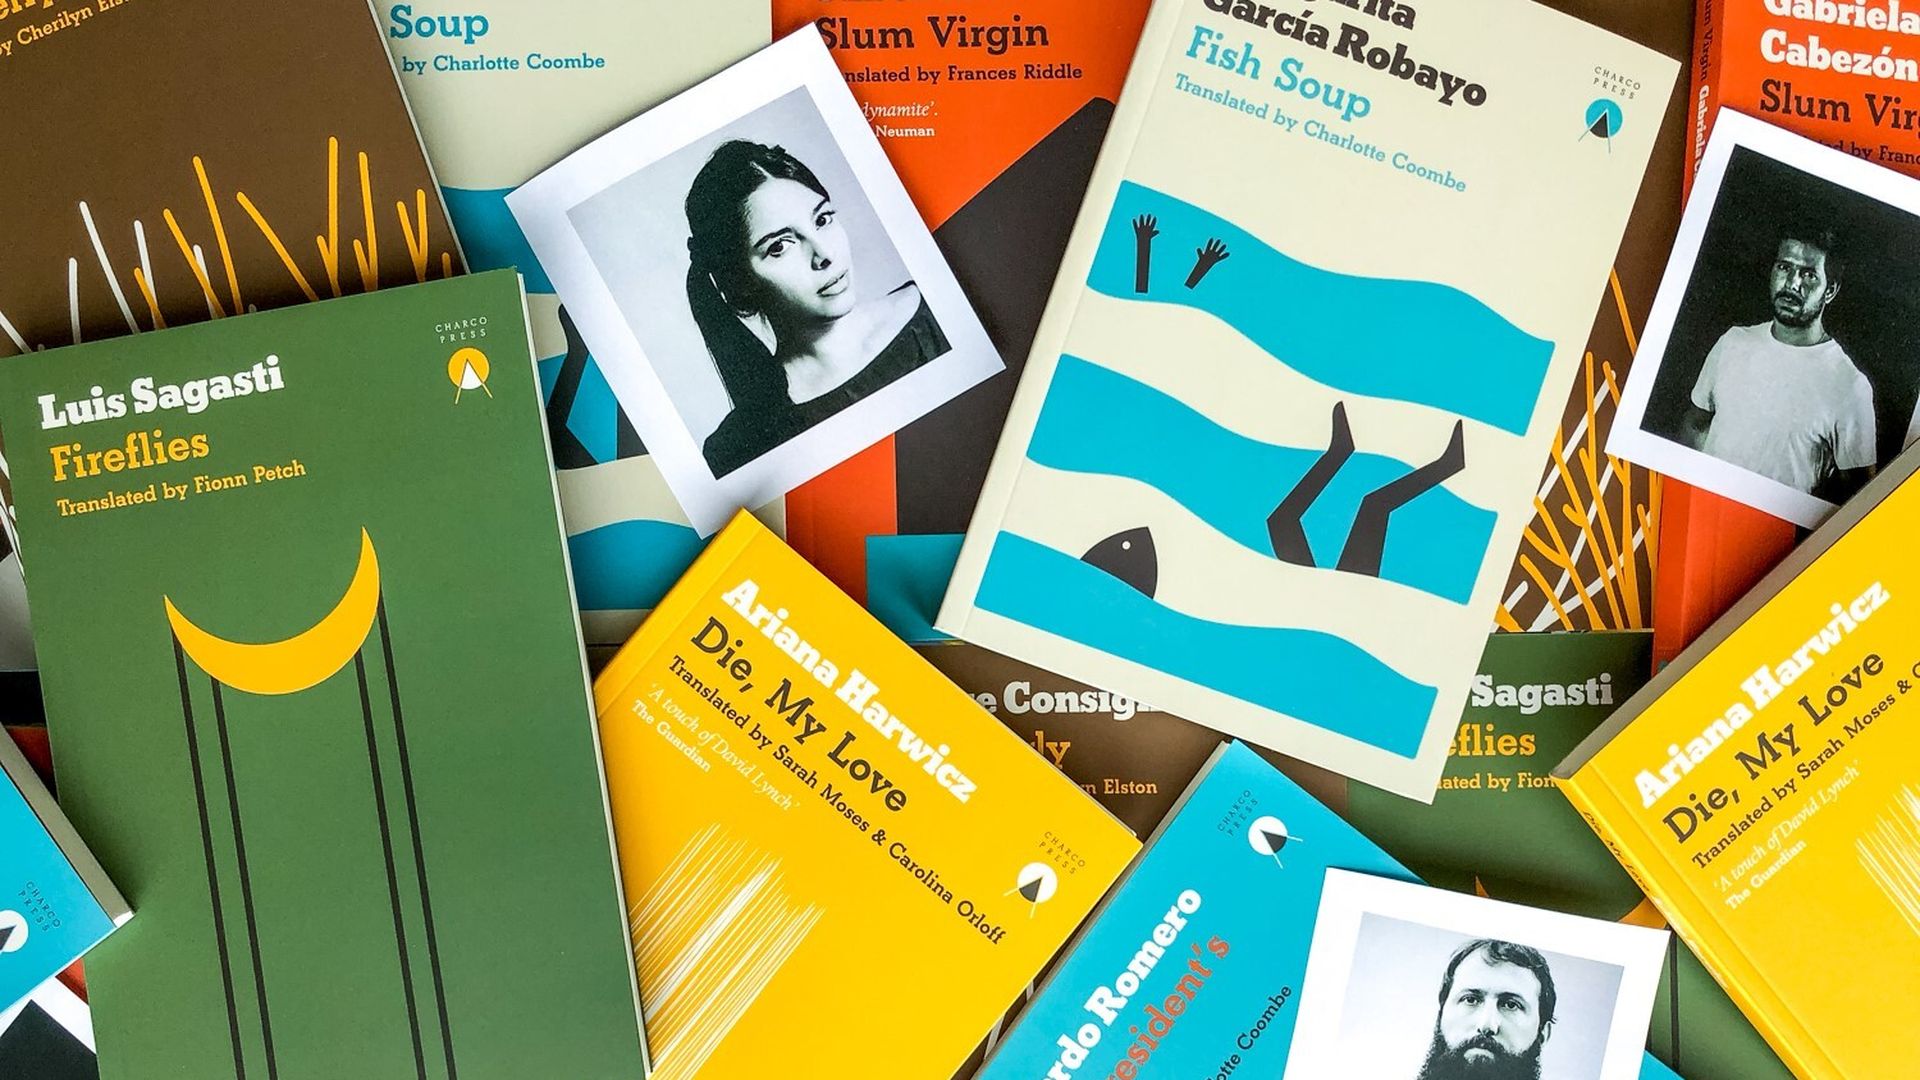 Several books in different colors like green, yellow, blue and brown are scattered